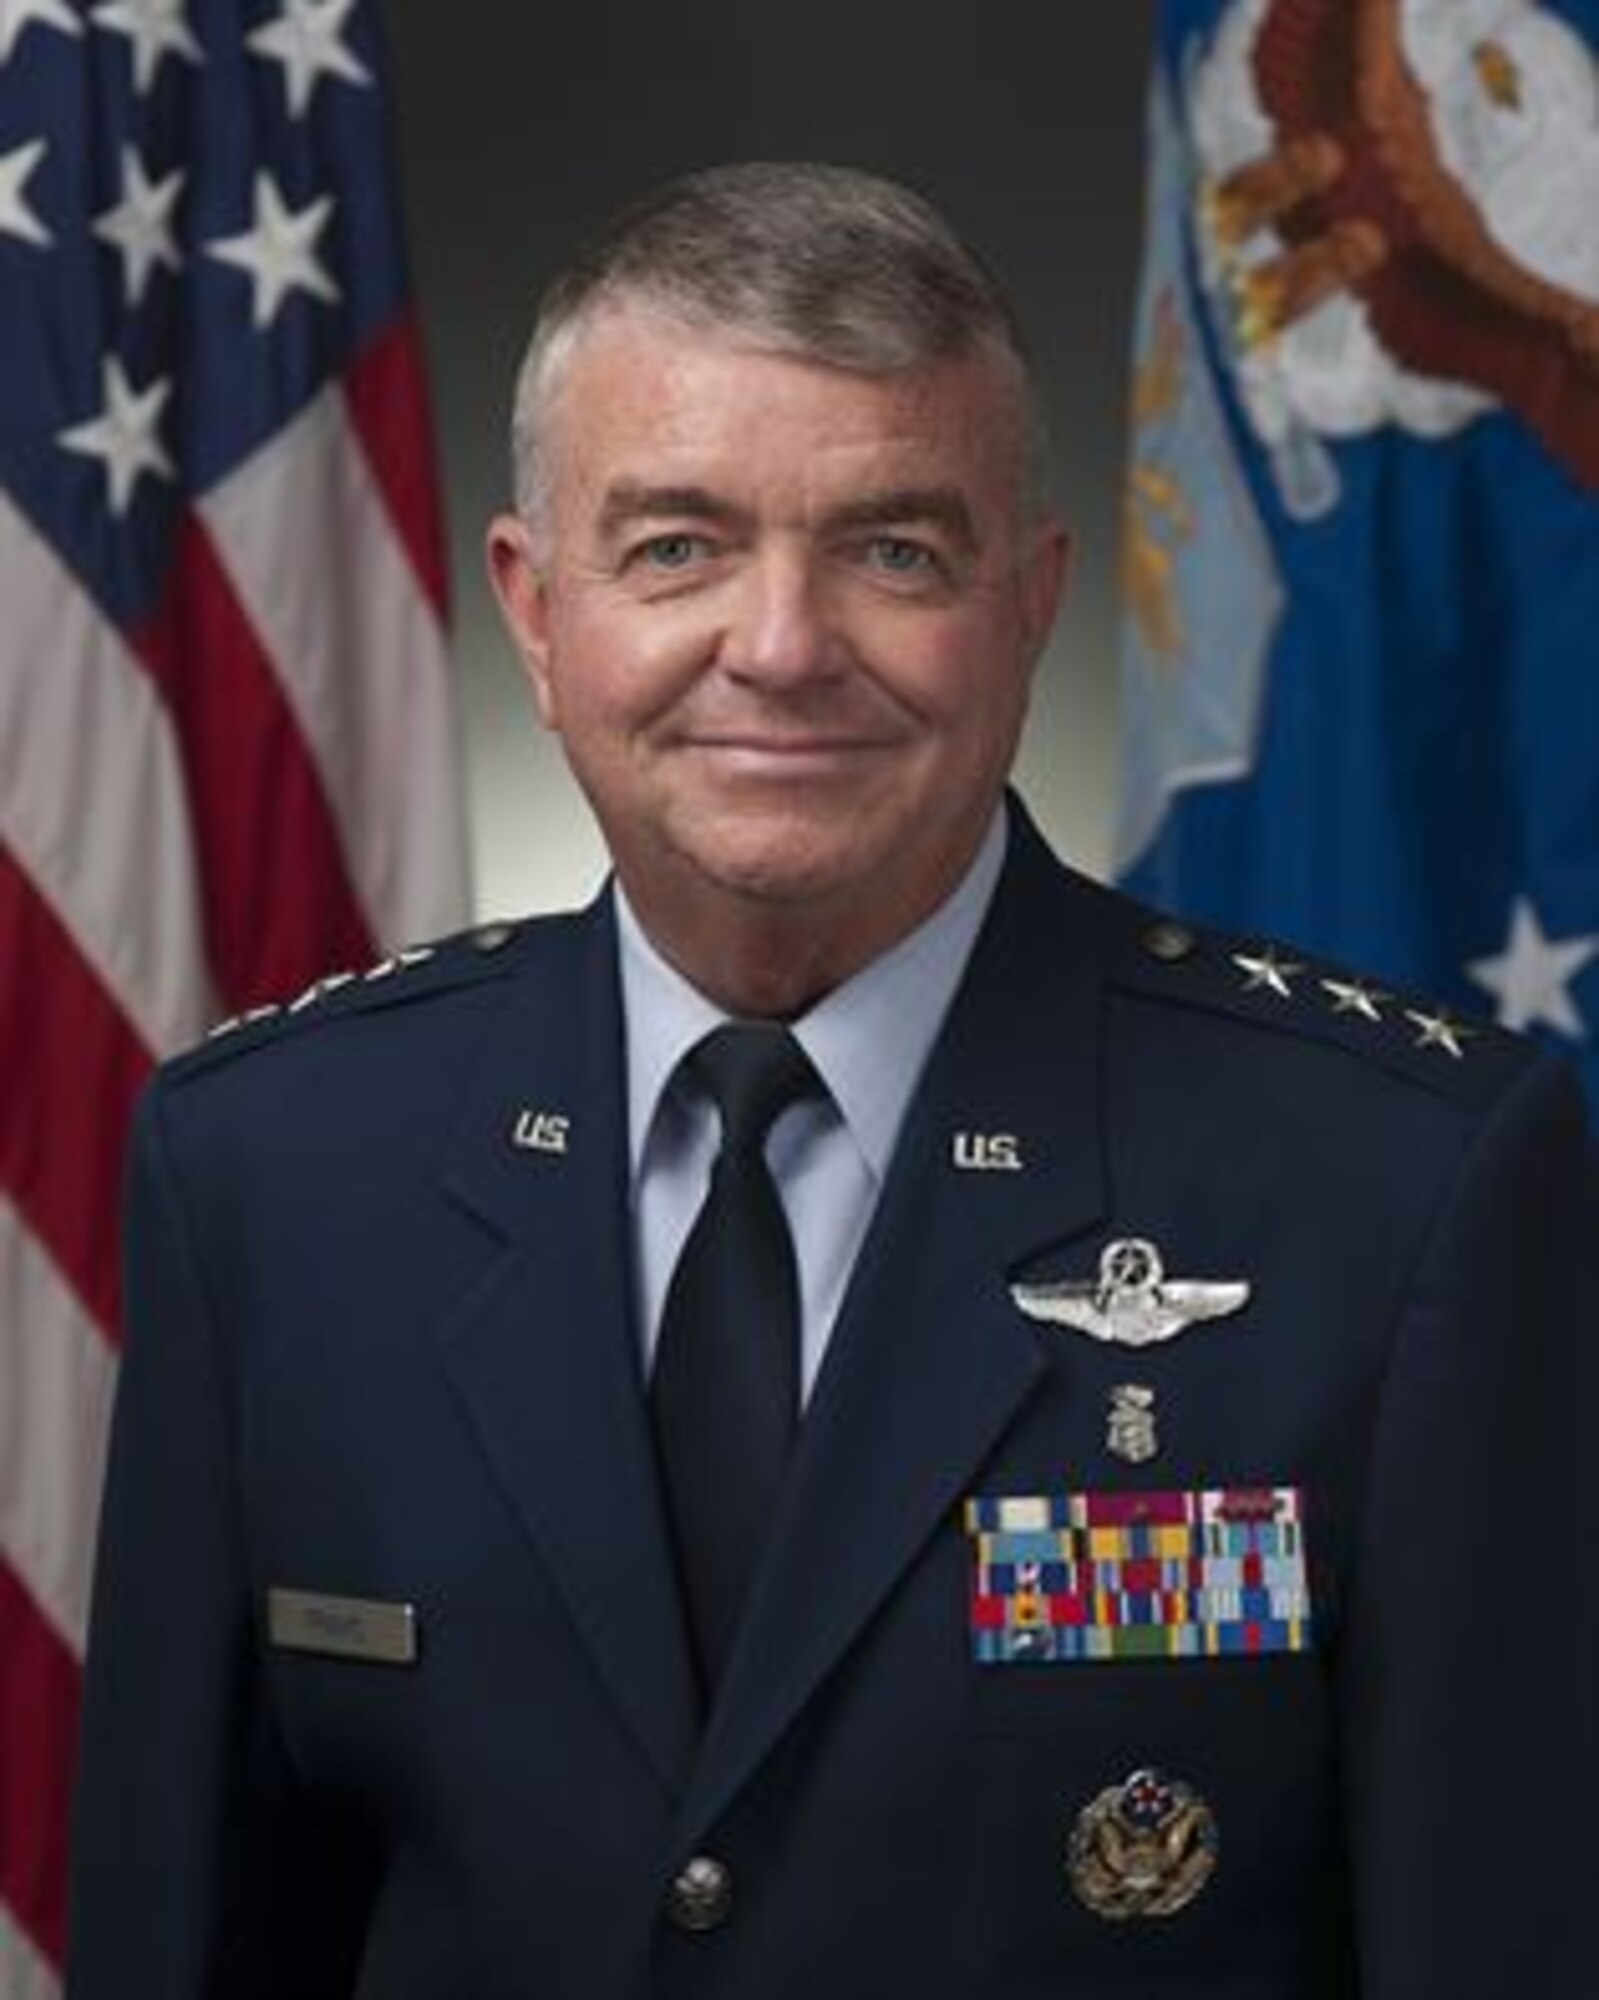 Lt. Gen. (Dr.) Thomas W. Travis is the Surgeon General of the Air Force, Headquarters U.S. Air Force, Washington, D.C. (Official Air Force Photo)